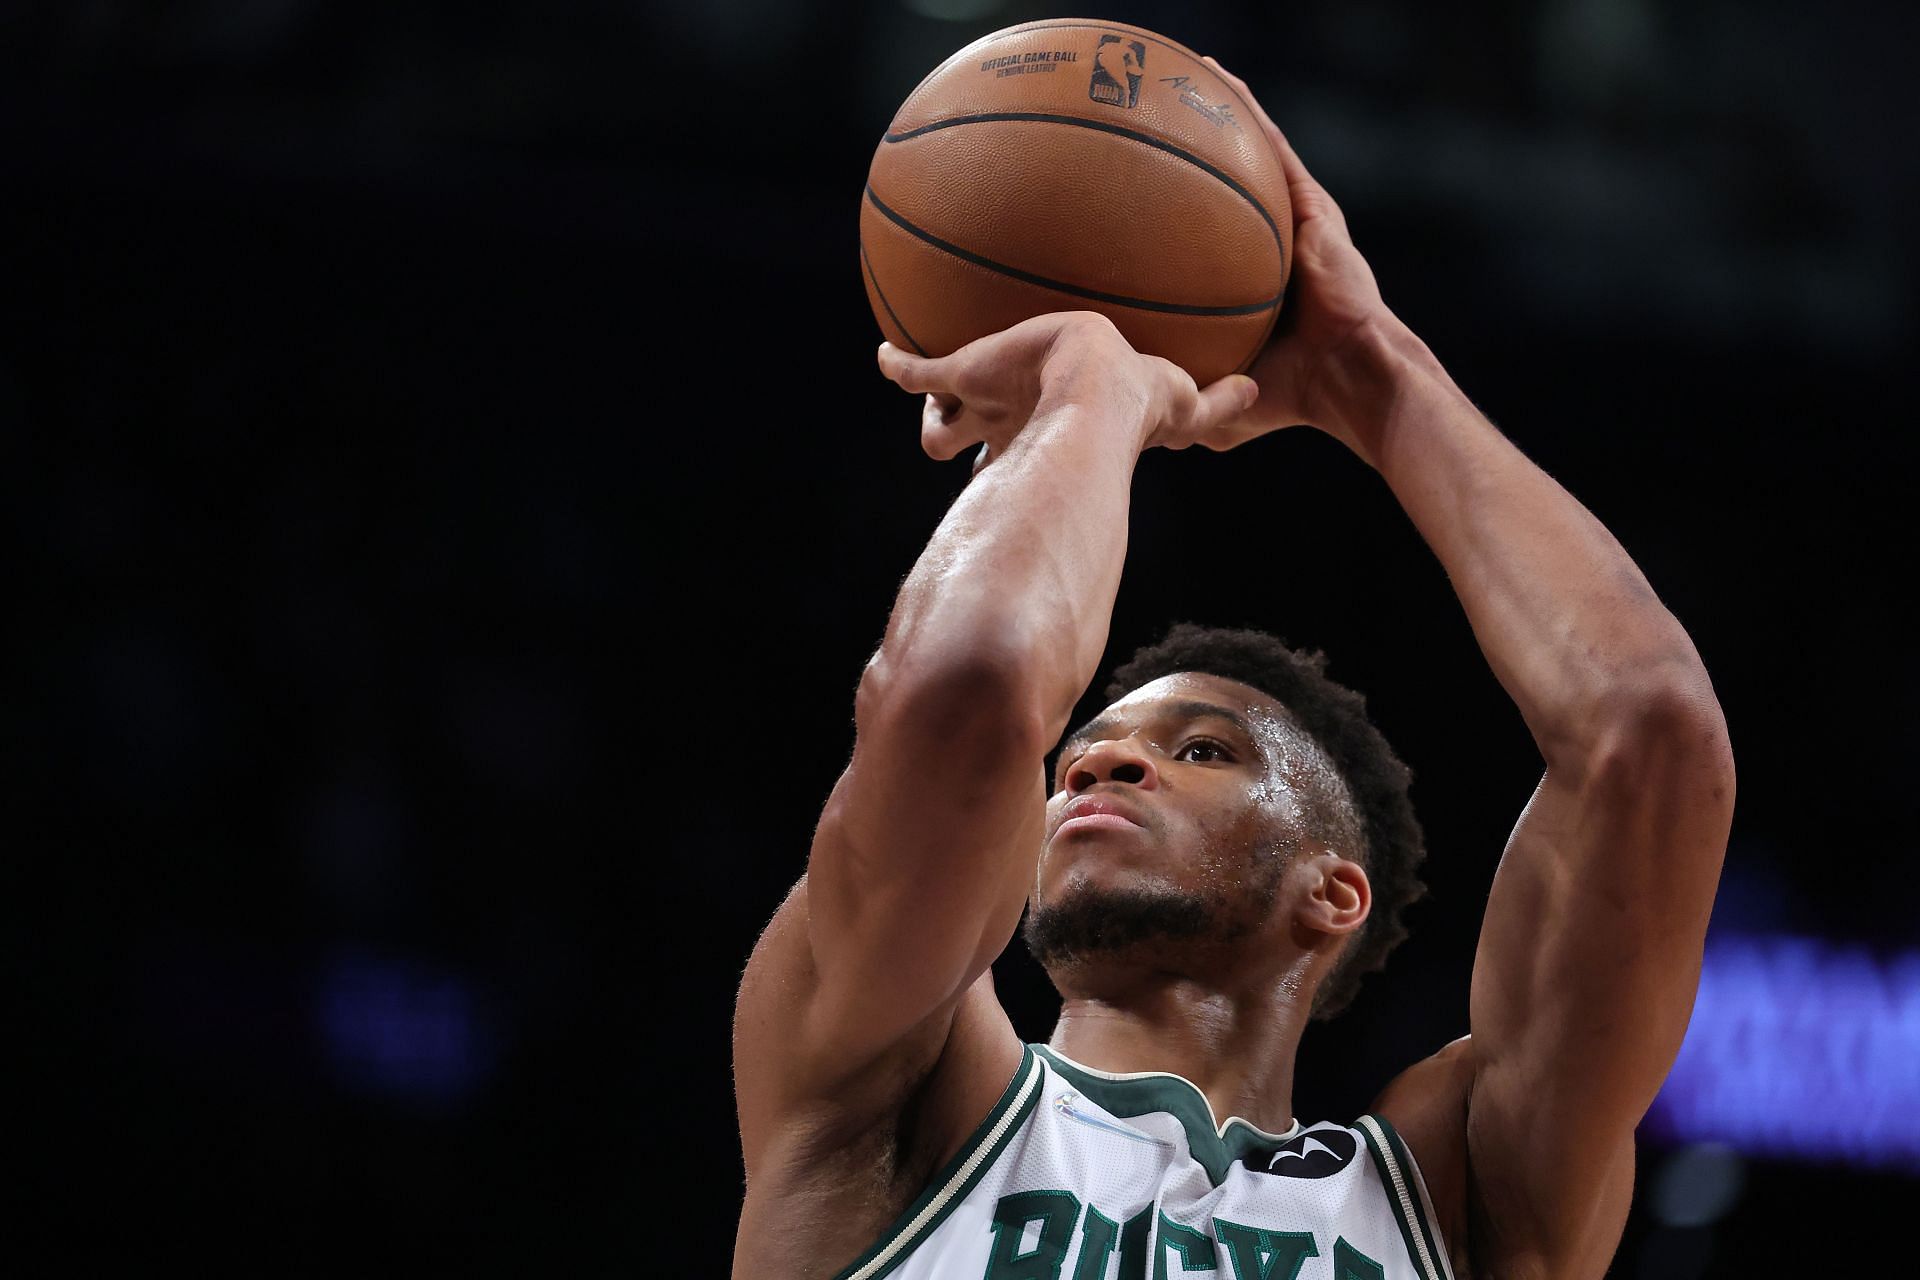 Giannis Antetokounmpo and the Milwaukee Bucks seek a 2-0 lead over the Chicago Bulls Wednesday night.